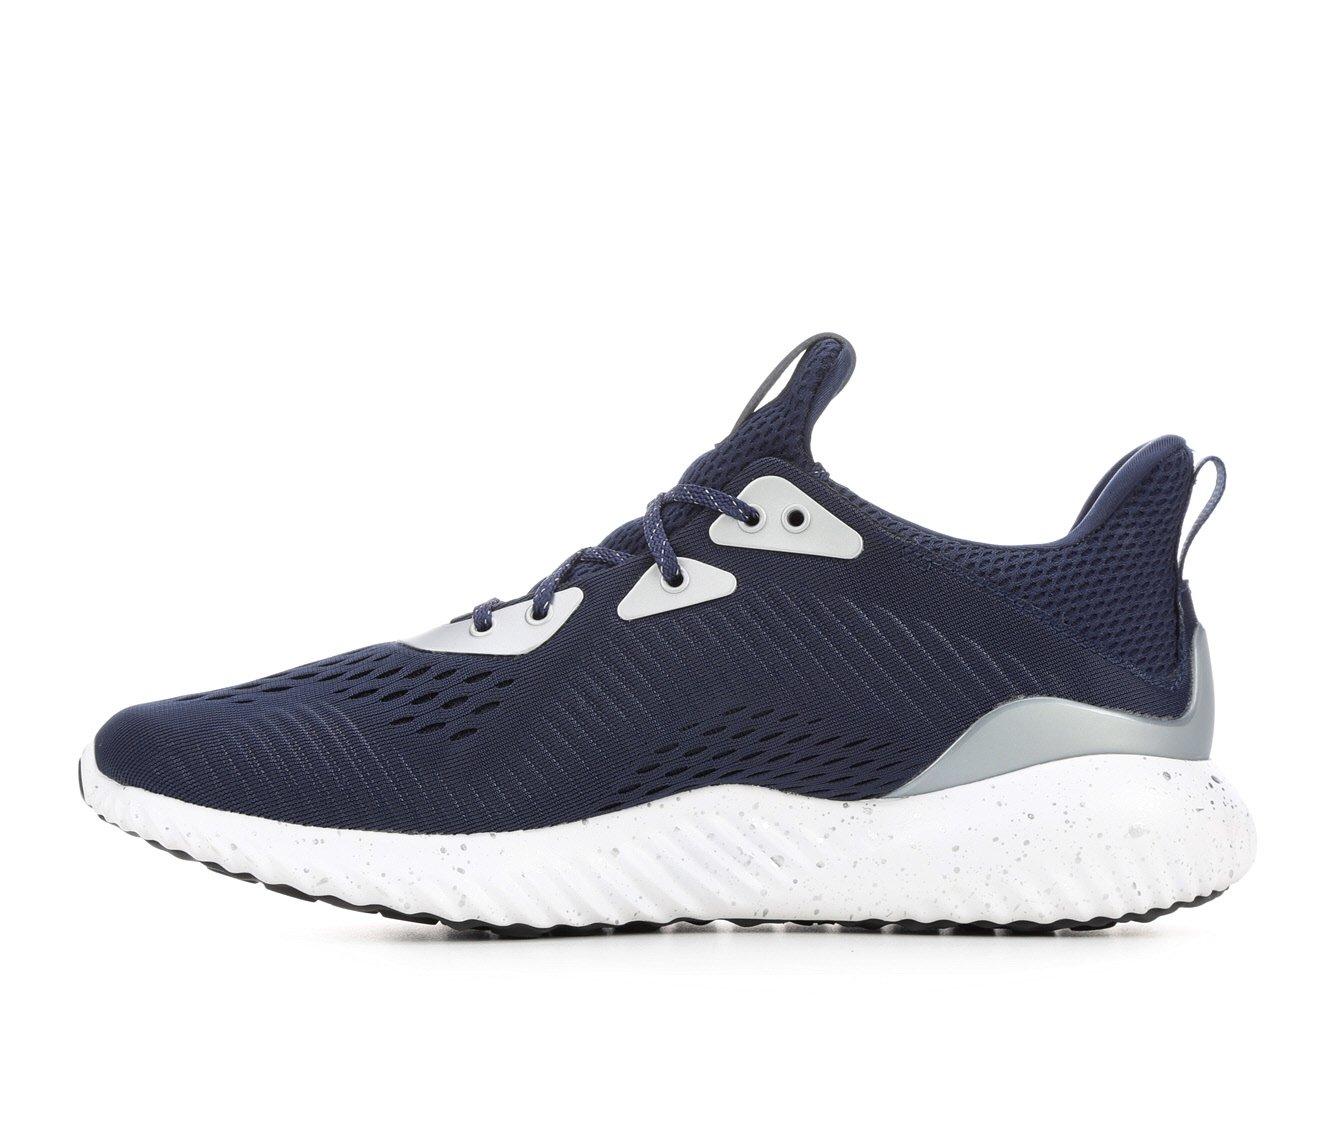 Men's Adidas Alphabounce Running Shoes | Shoe Carnival